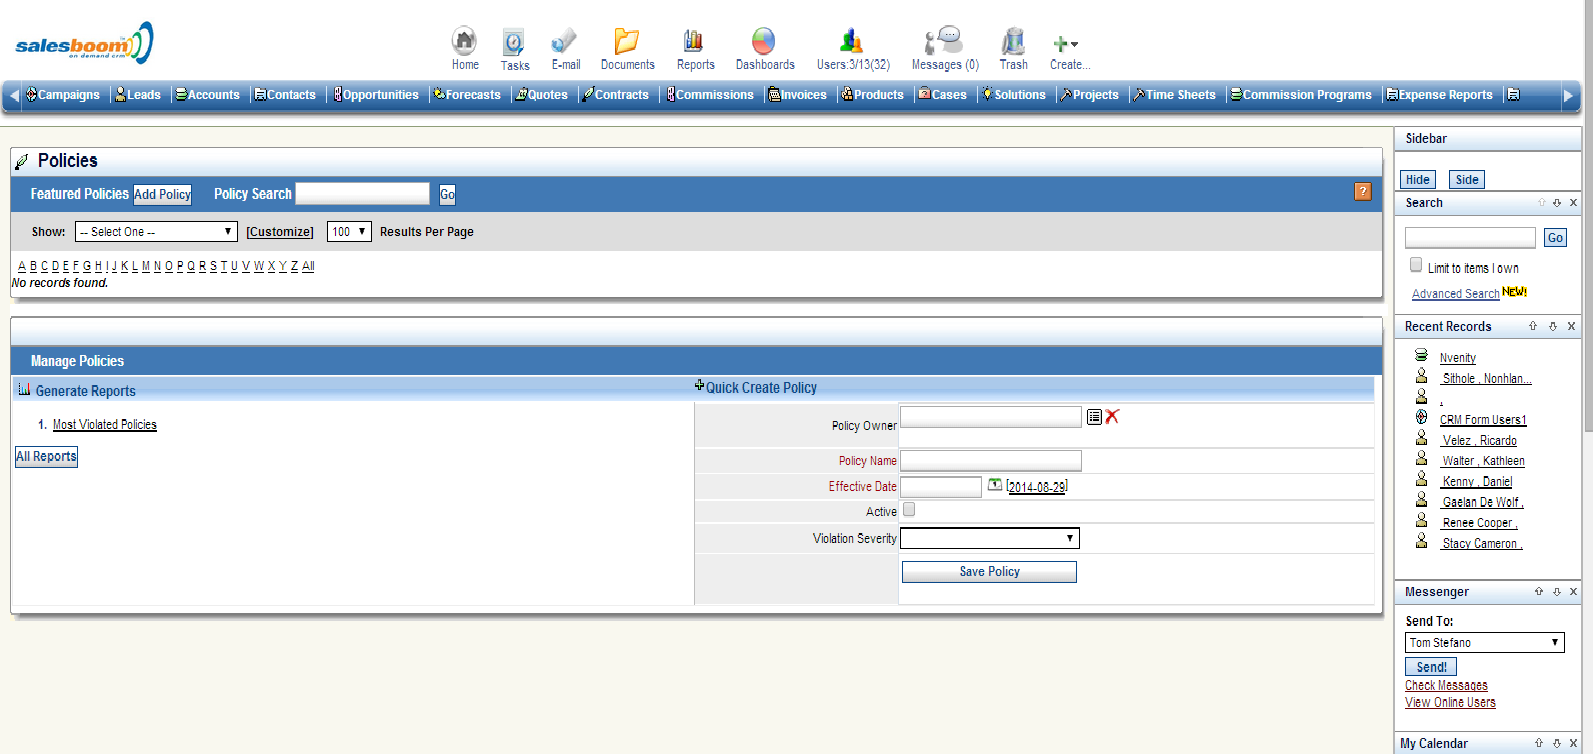 CRM-Corporate-Policy-Management | Salesboom CLoud CRM software